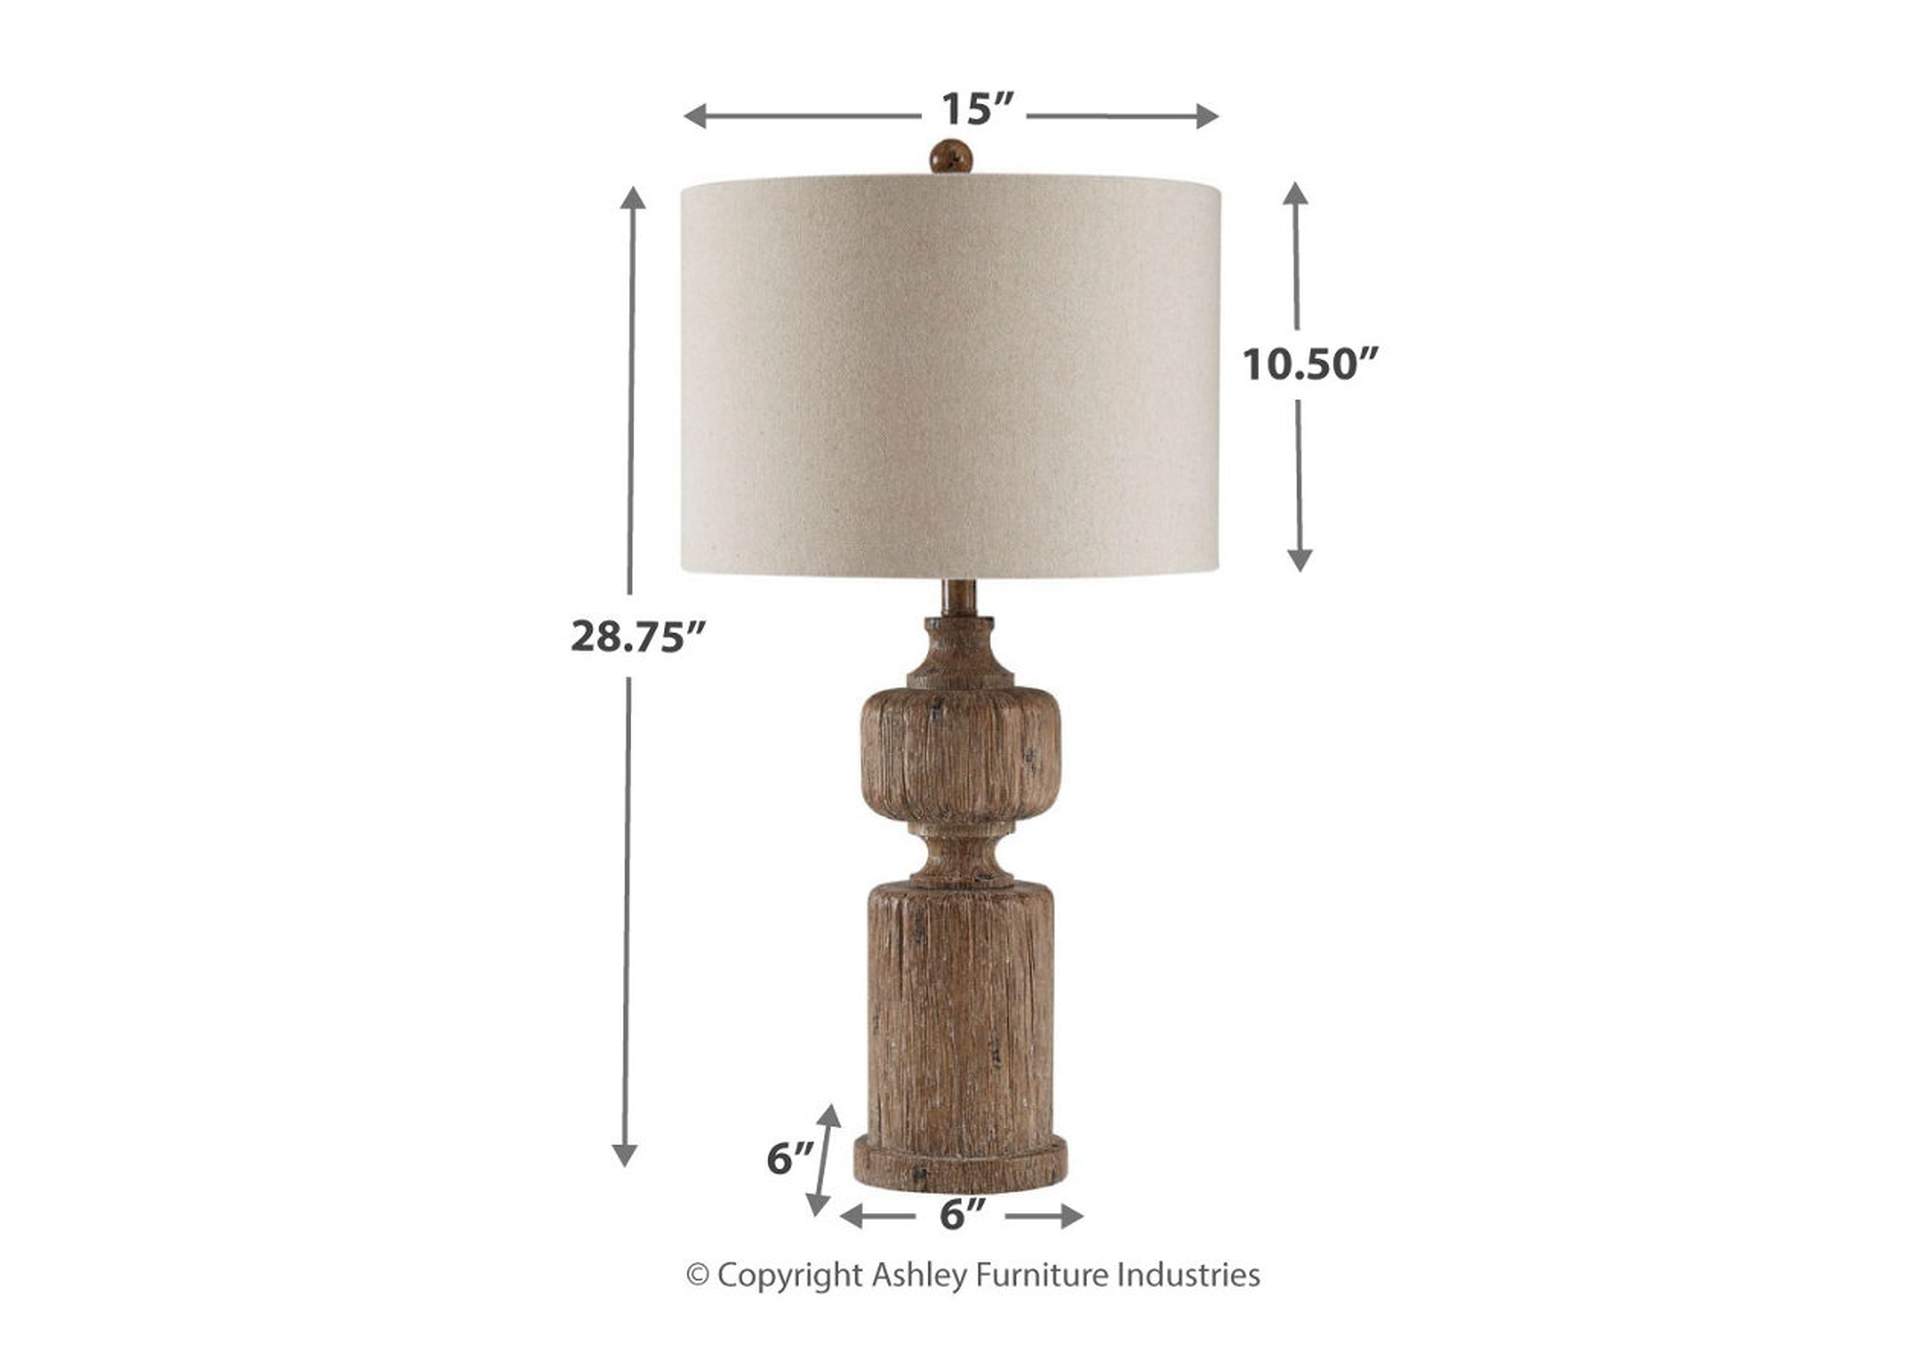 Madelief Table Lamp,Direct To Consumer Express